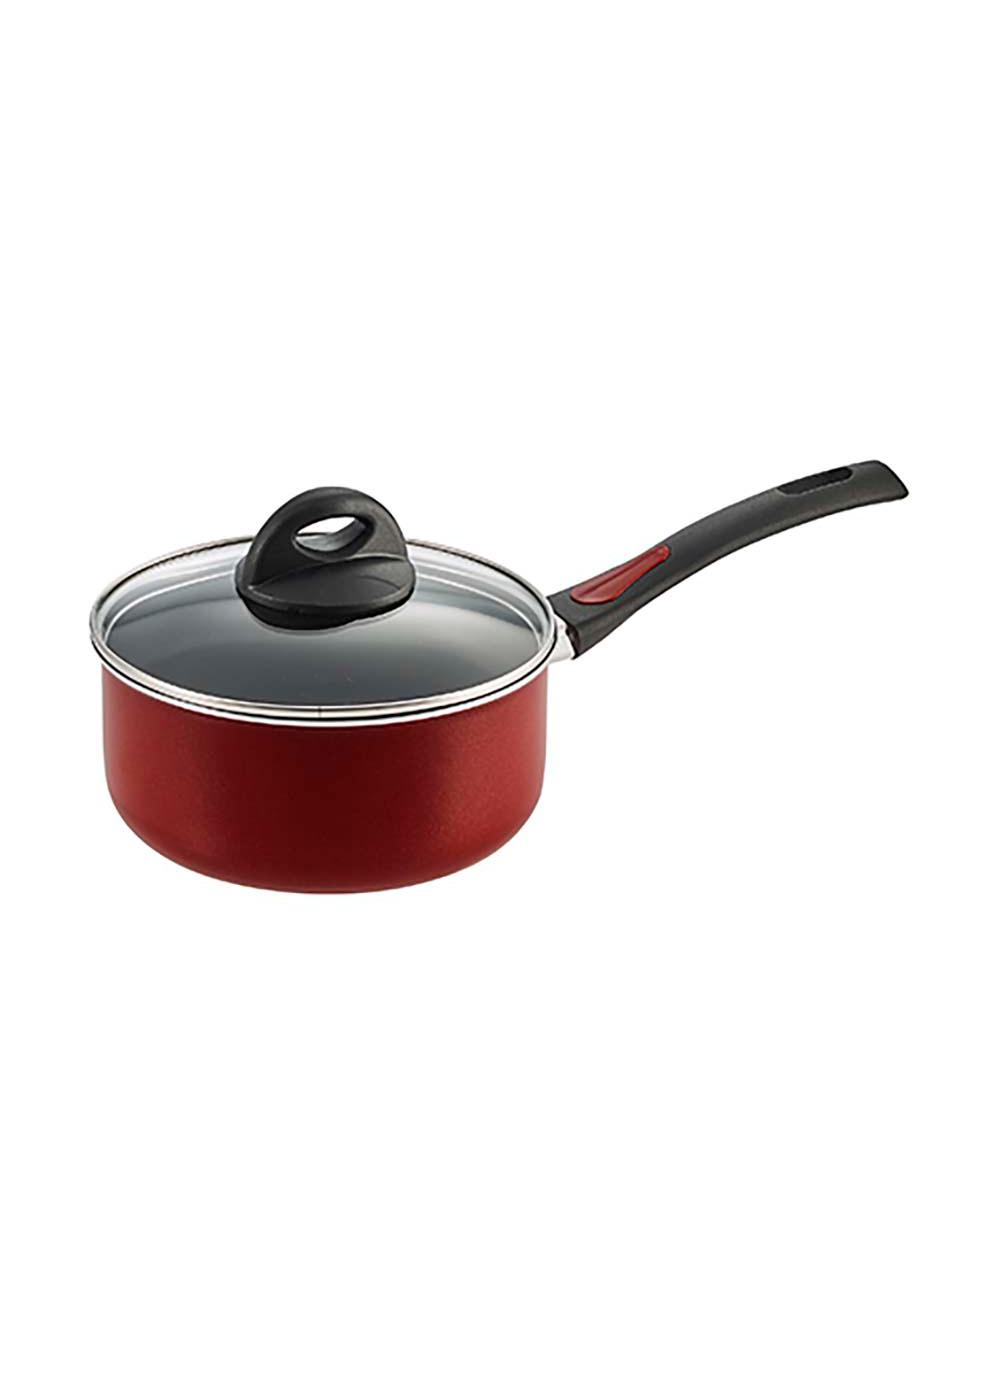 Tramontina Non-Stick Red Cookware Set; image 9 of 14